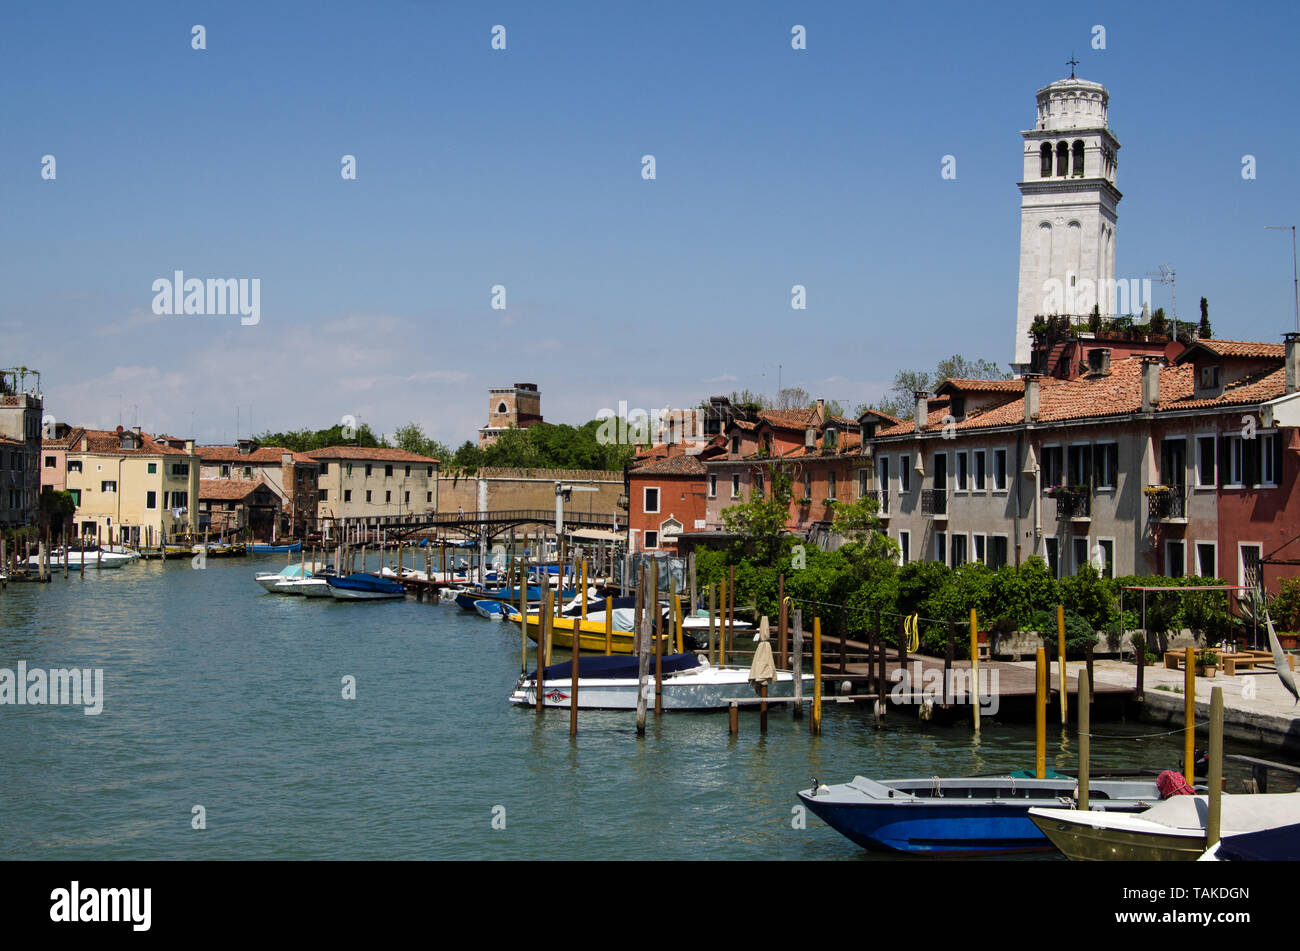 VENICE, ITALY - MAY 10, 2019:  View on a sunny day along the Canale di San Pietro in Venice.  To the right is the bell tower of the Basilica di San Pi Stock Photo